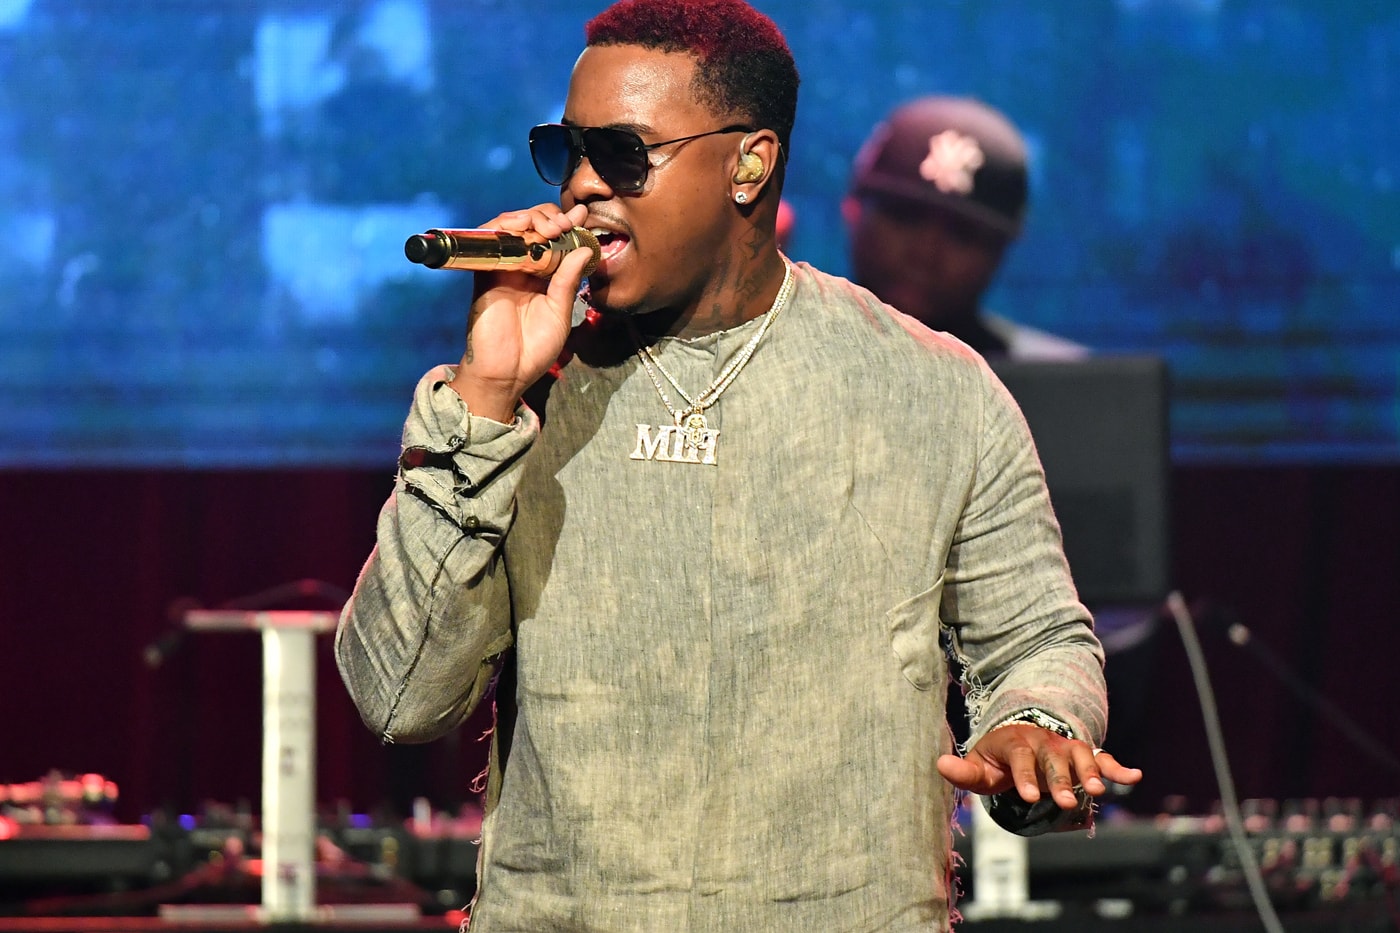 Jeremih Reveals Title of Next Album, Hints at Possible Feature on Kanye West's 'WAVES'